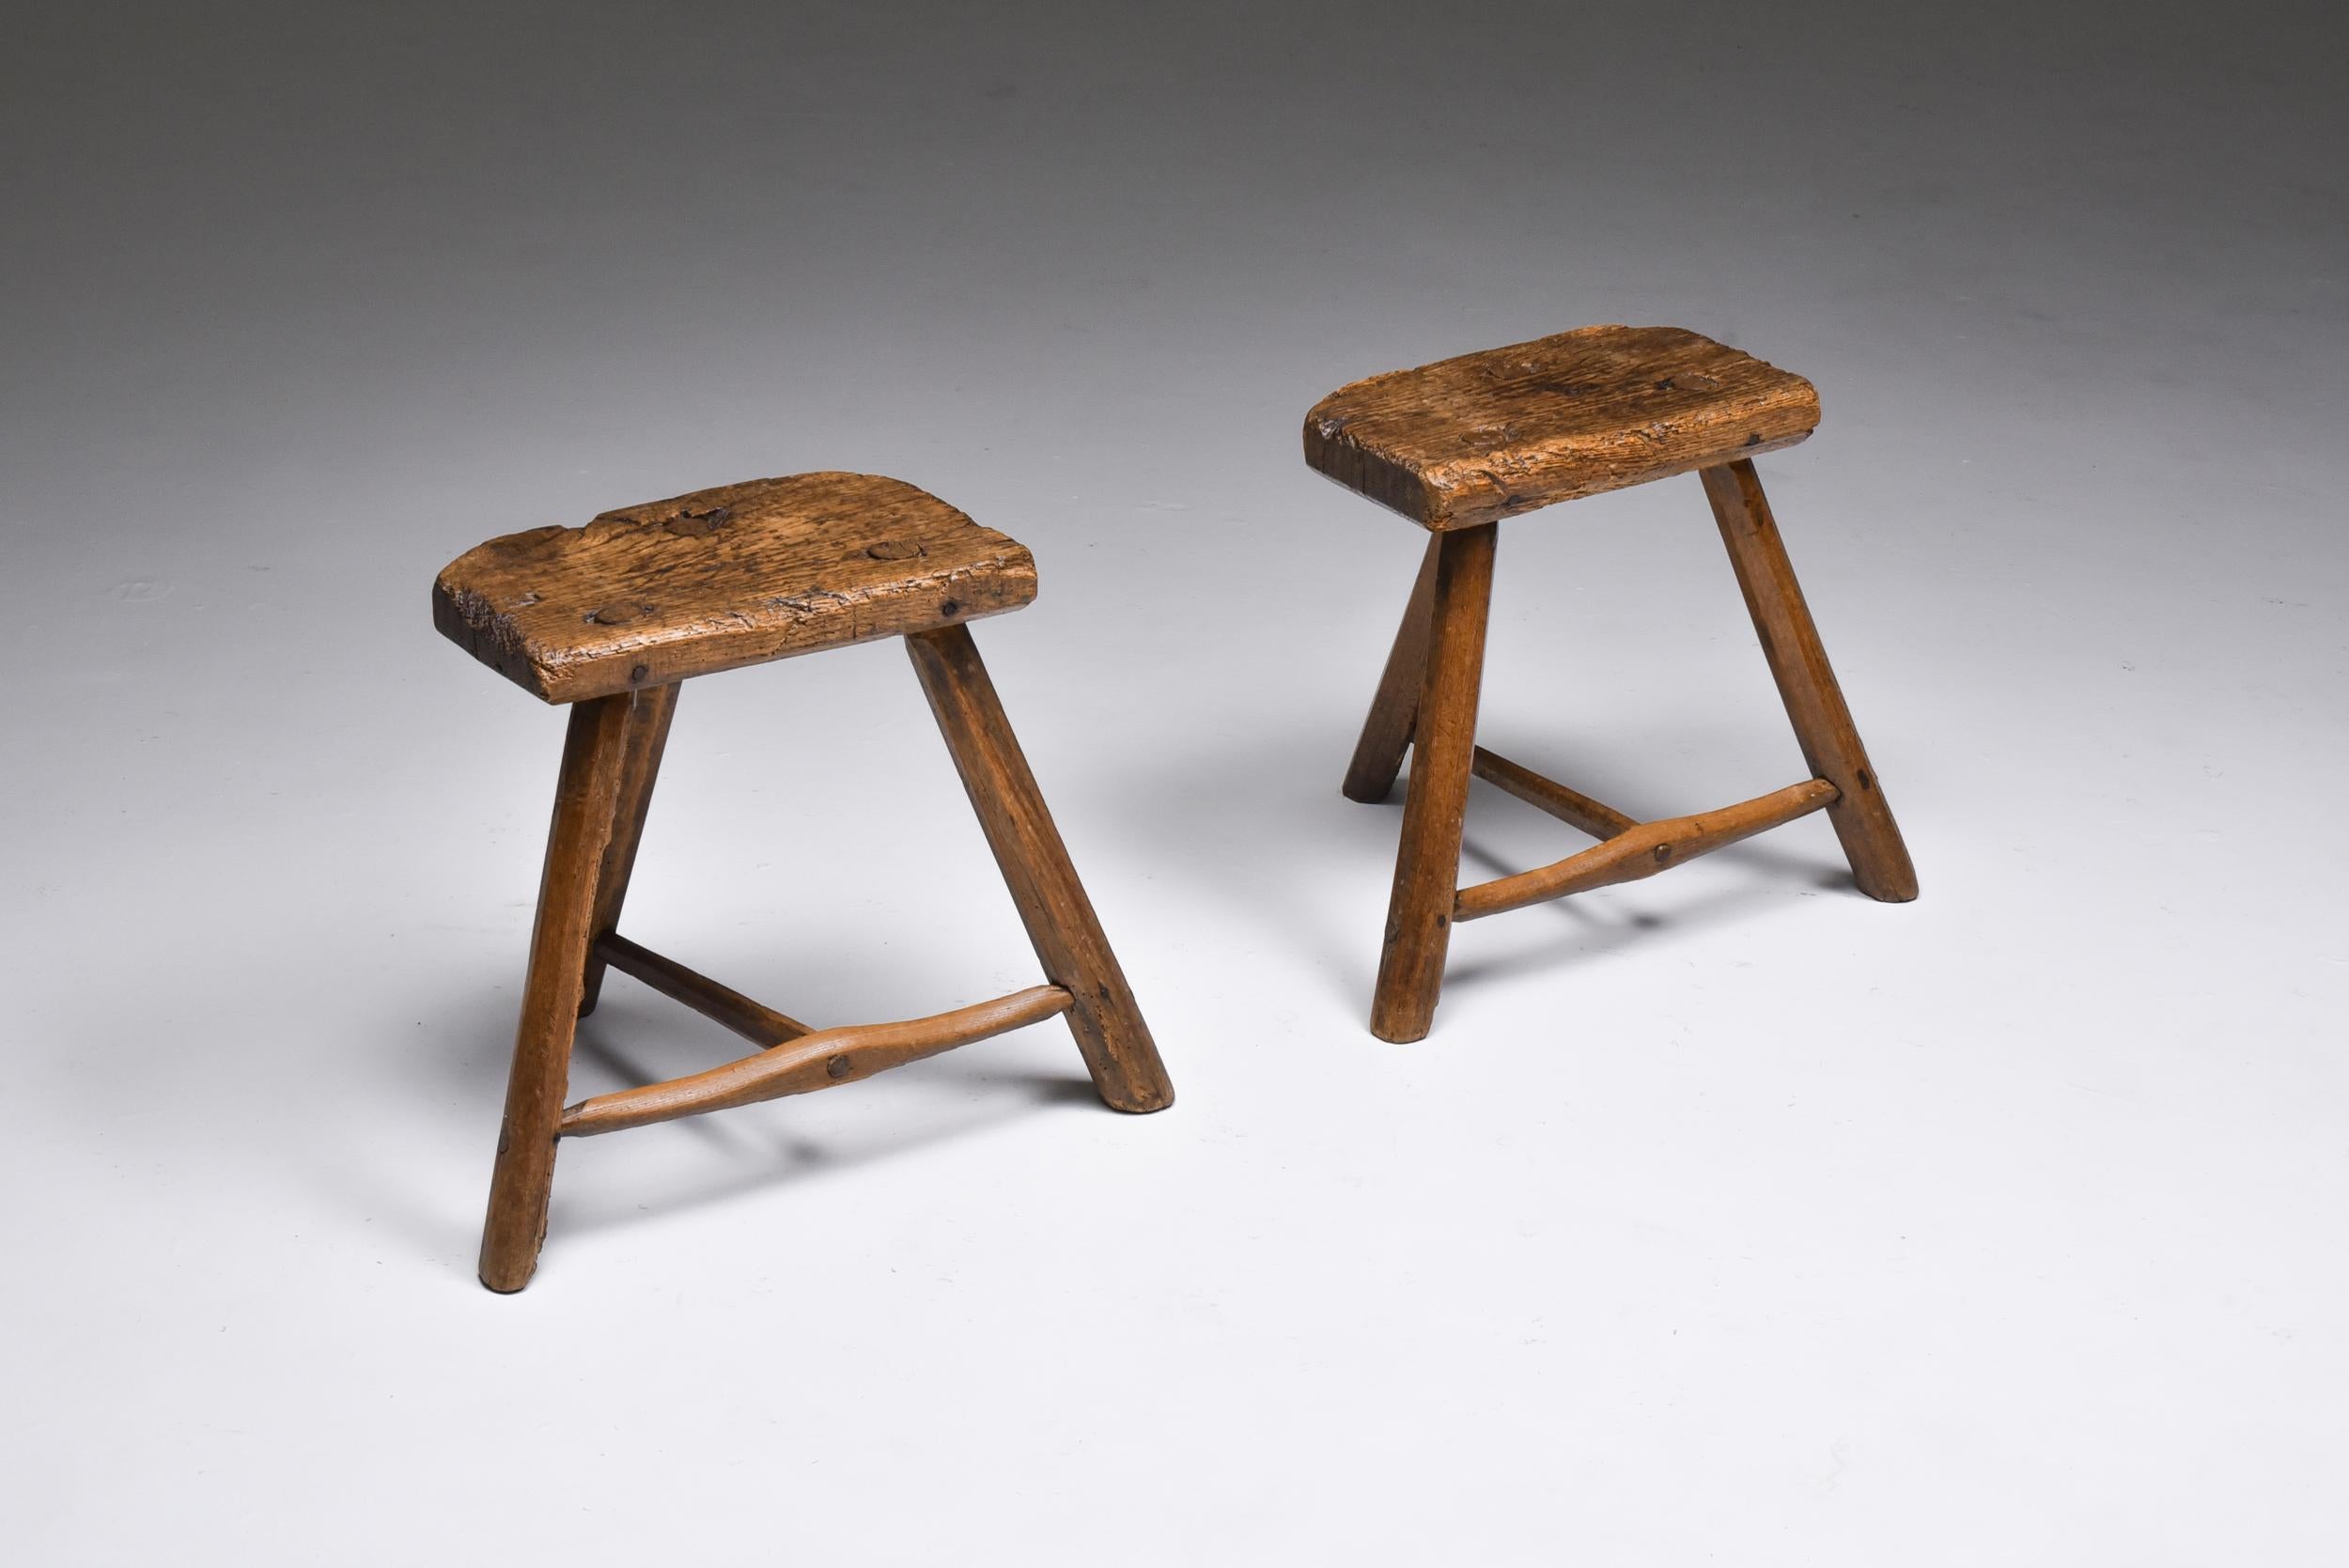 Wabi sabi, rustic, folk art, milk stools, France, 19th century

would fit well in a zen inspired Axel Vervoordt style interior
In it's great original condition.


 